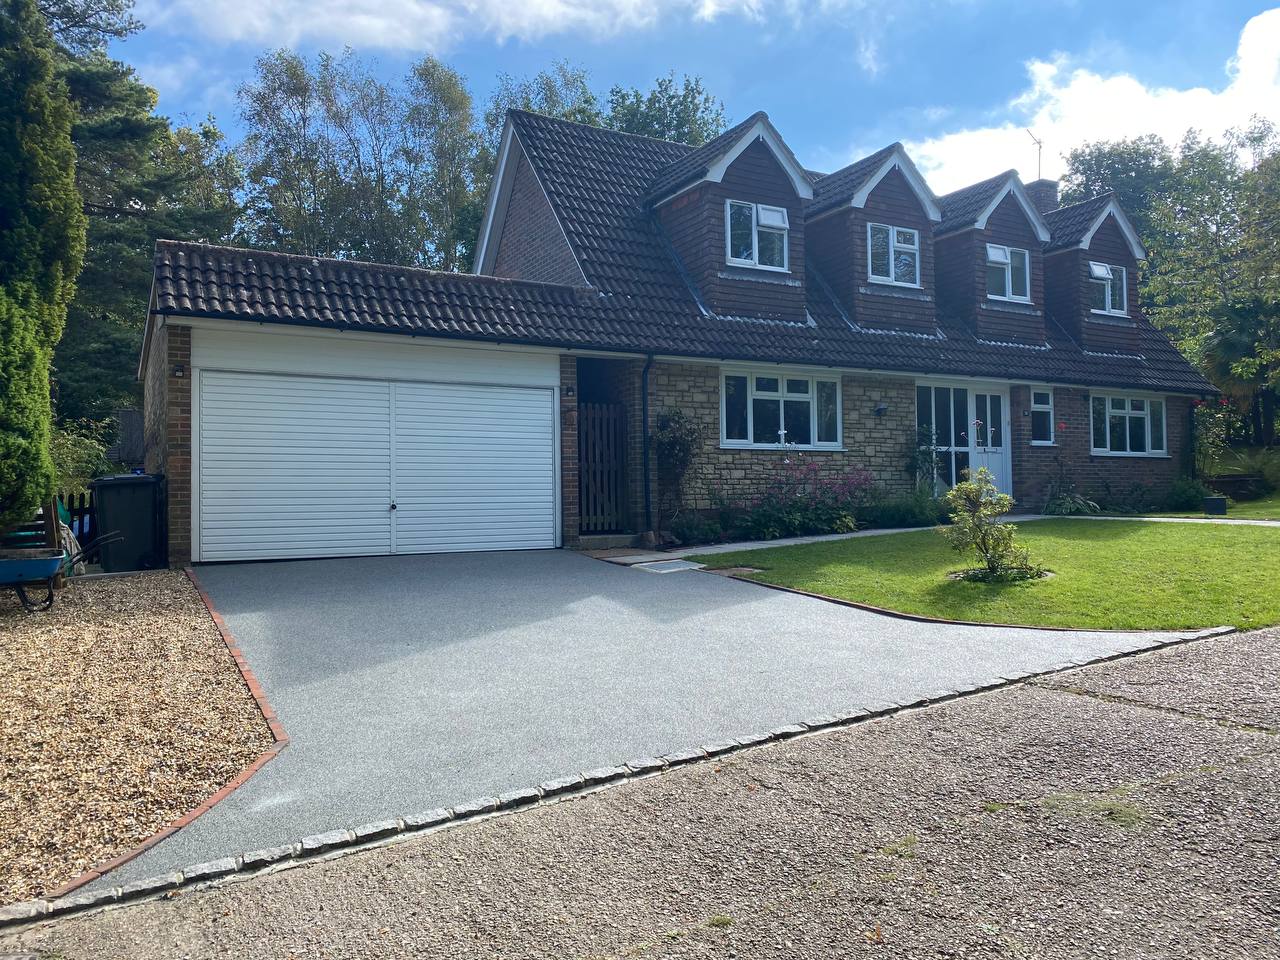 This is a photo of a resin driveway installed in Rotherham by Rotherham Resin Driveways